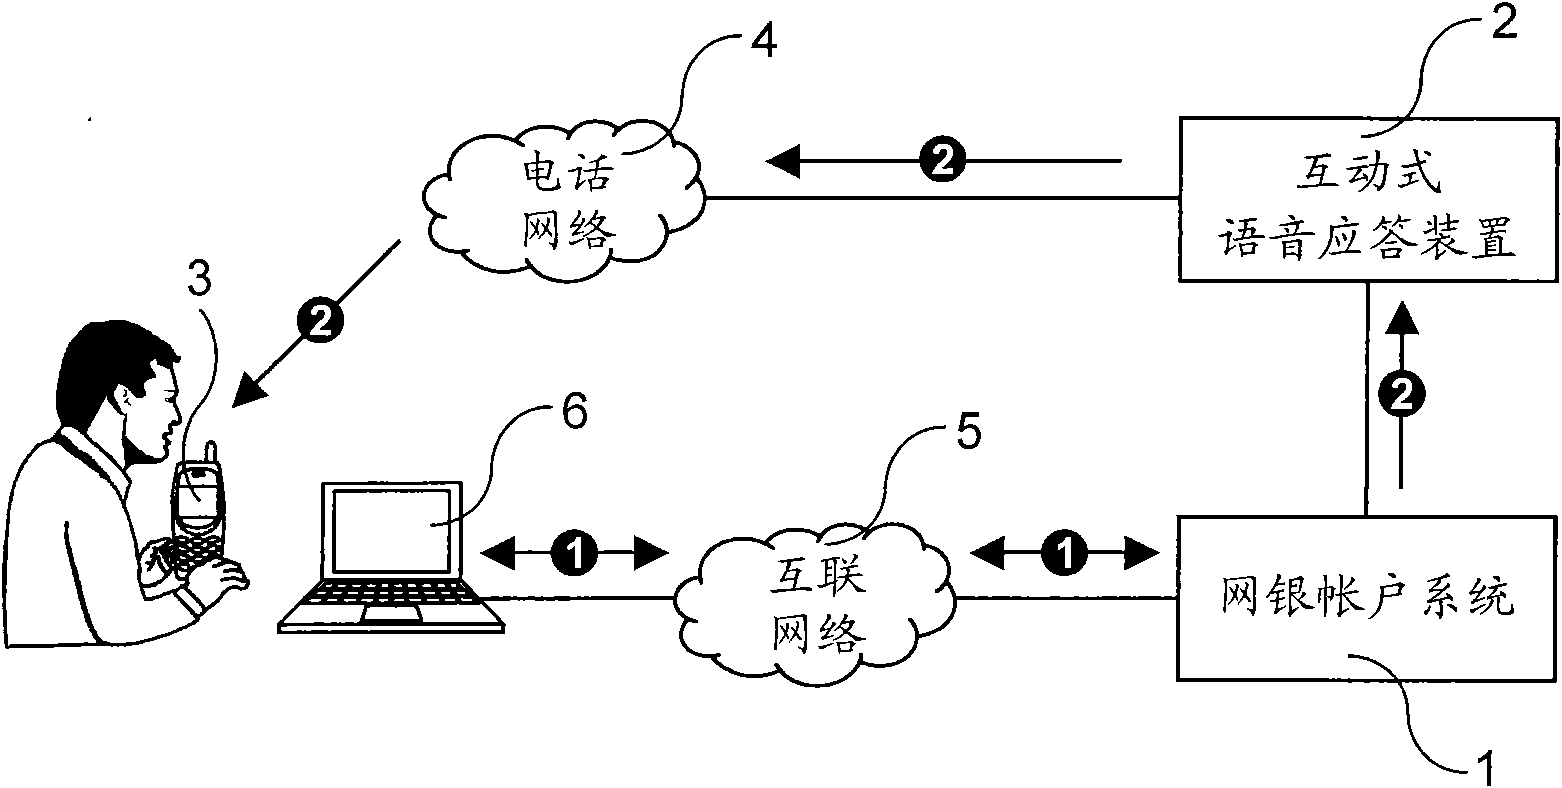 Security guarding method for automatically calling to inform customer of logining, transferring and paying of internet banking